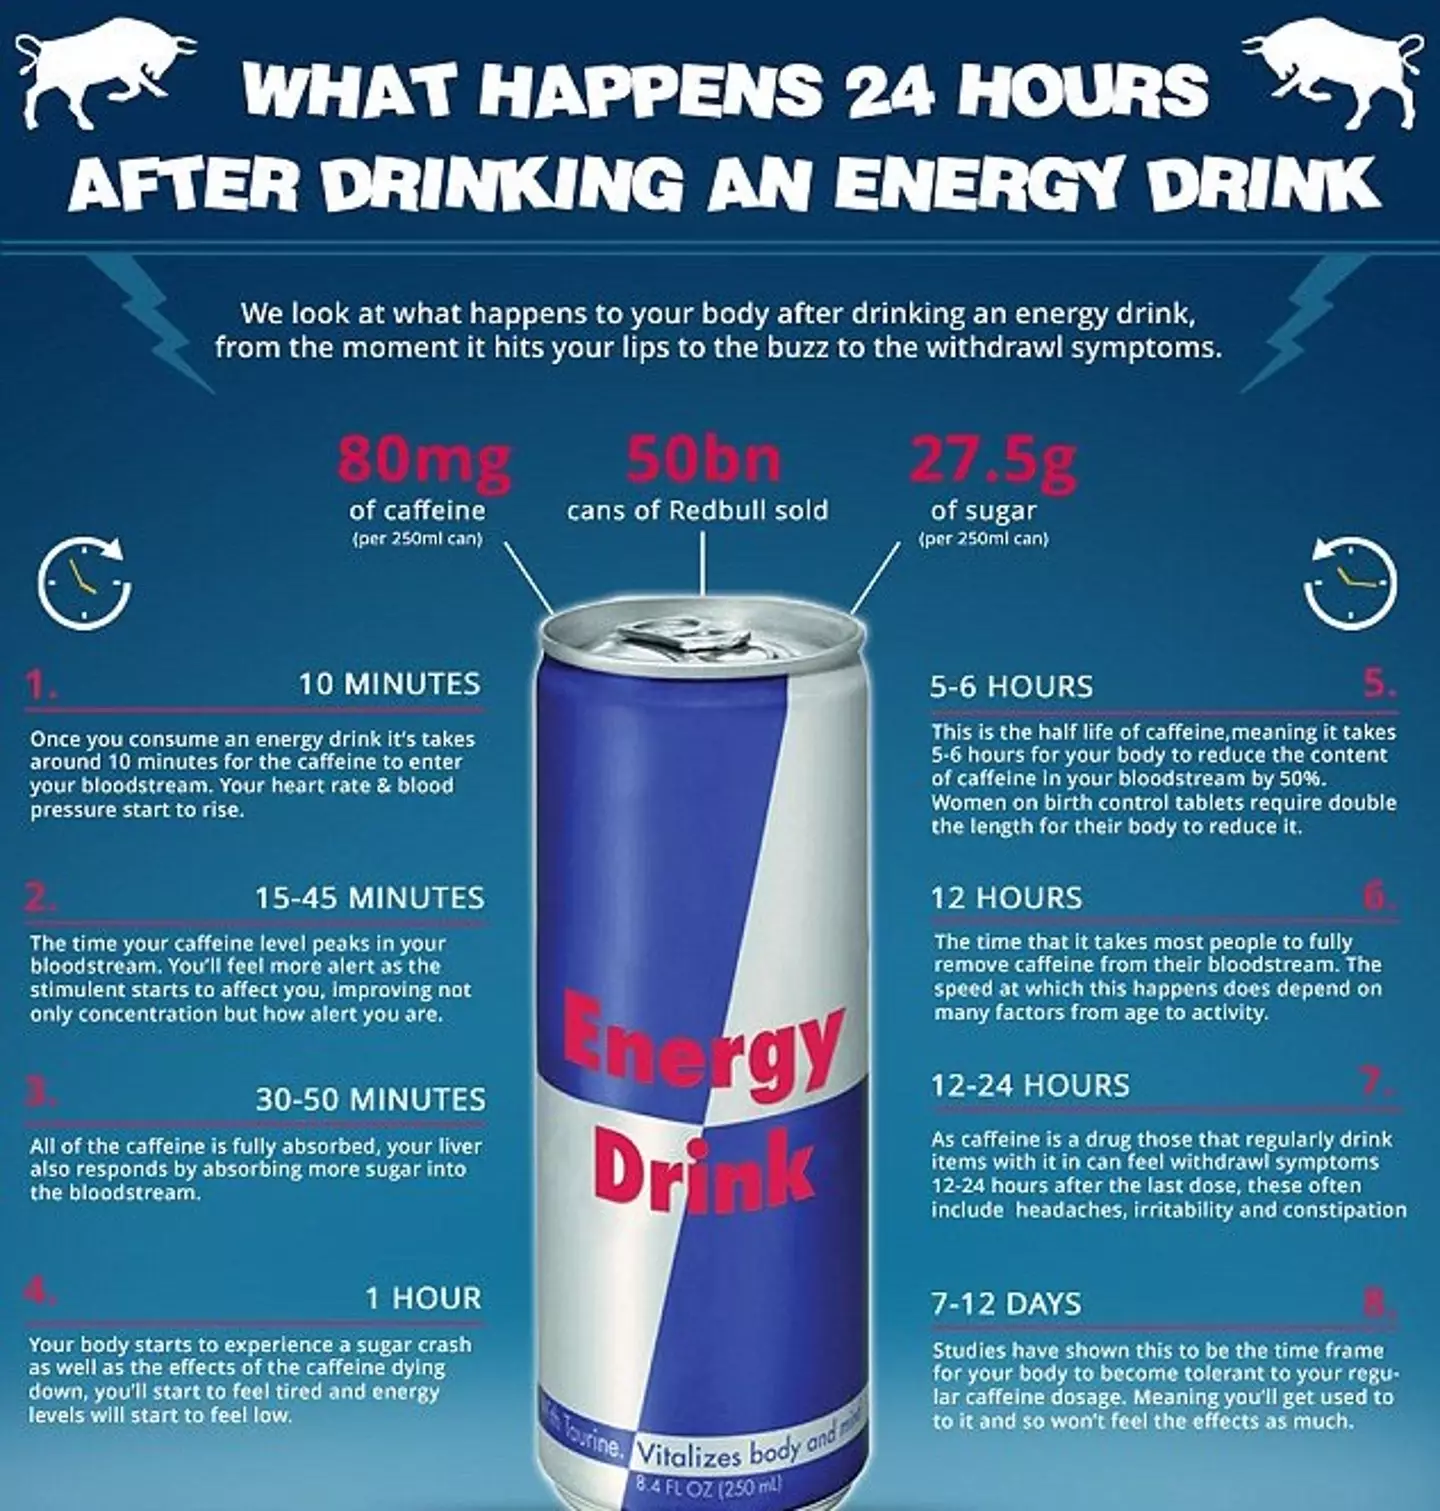 The infographic explains how one 250mg can of Redbull contains 80mg of caffeine, as well as 27.5g of sugar.